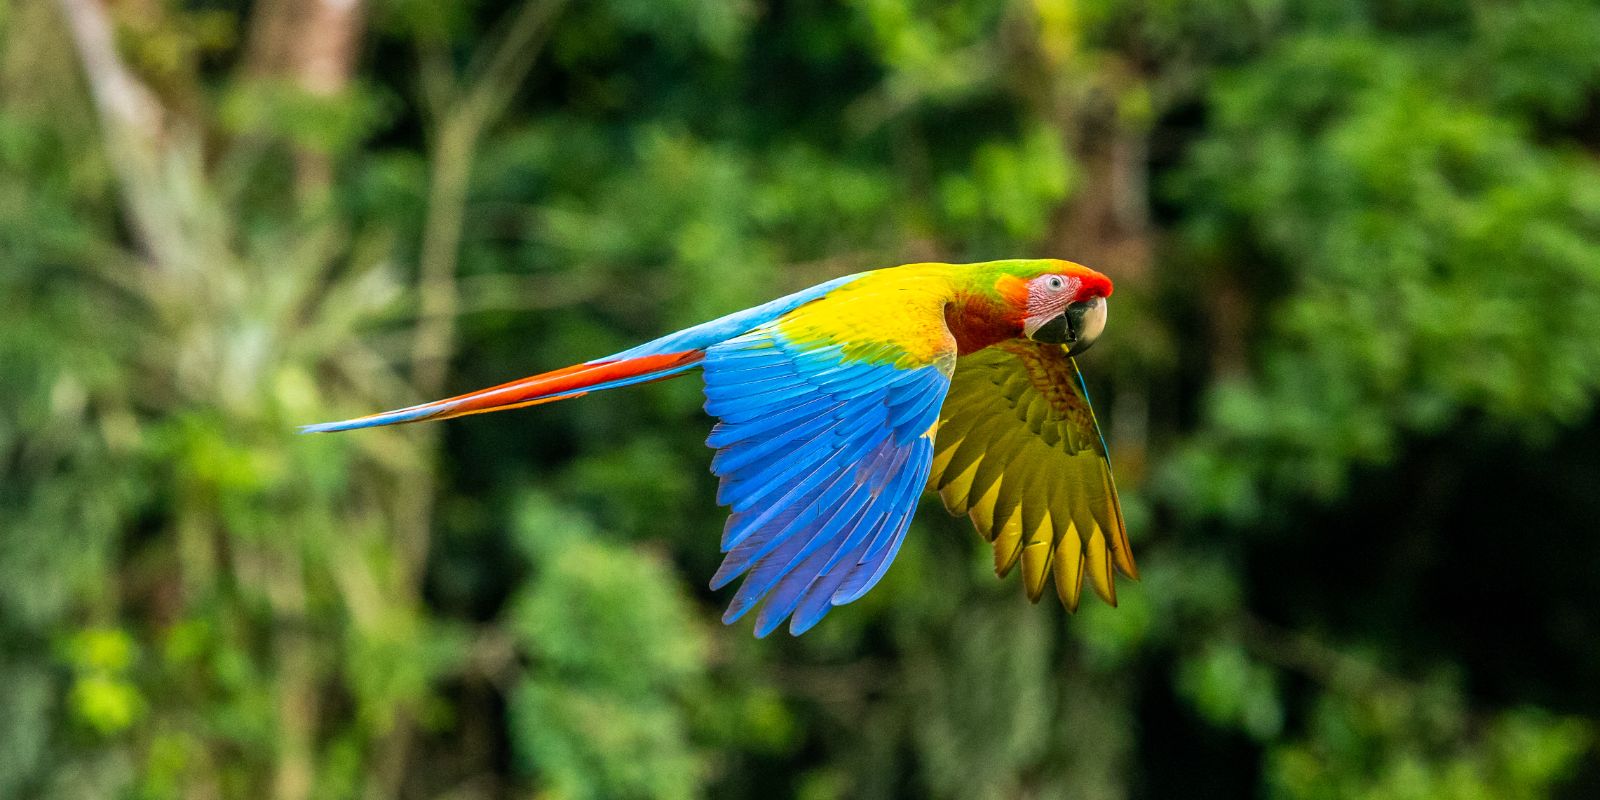 Macaw parrot in Costa Rica